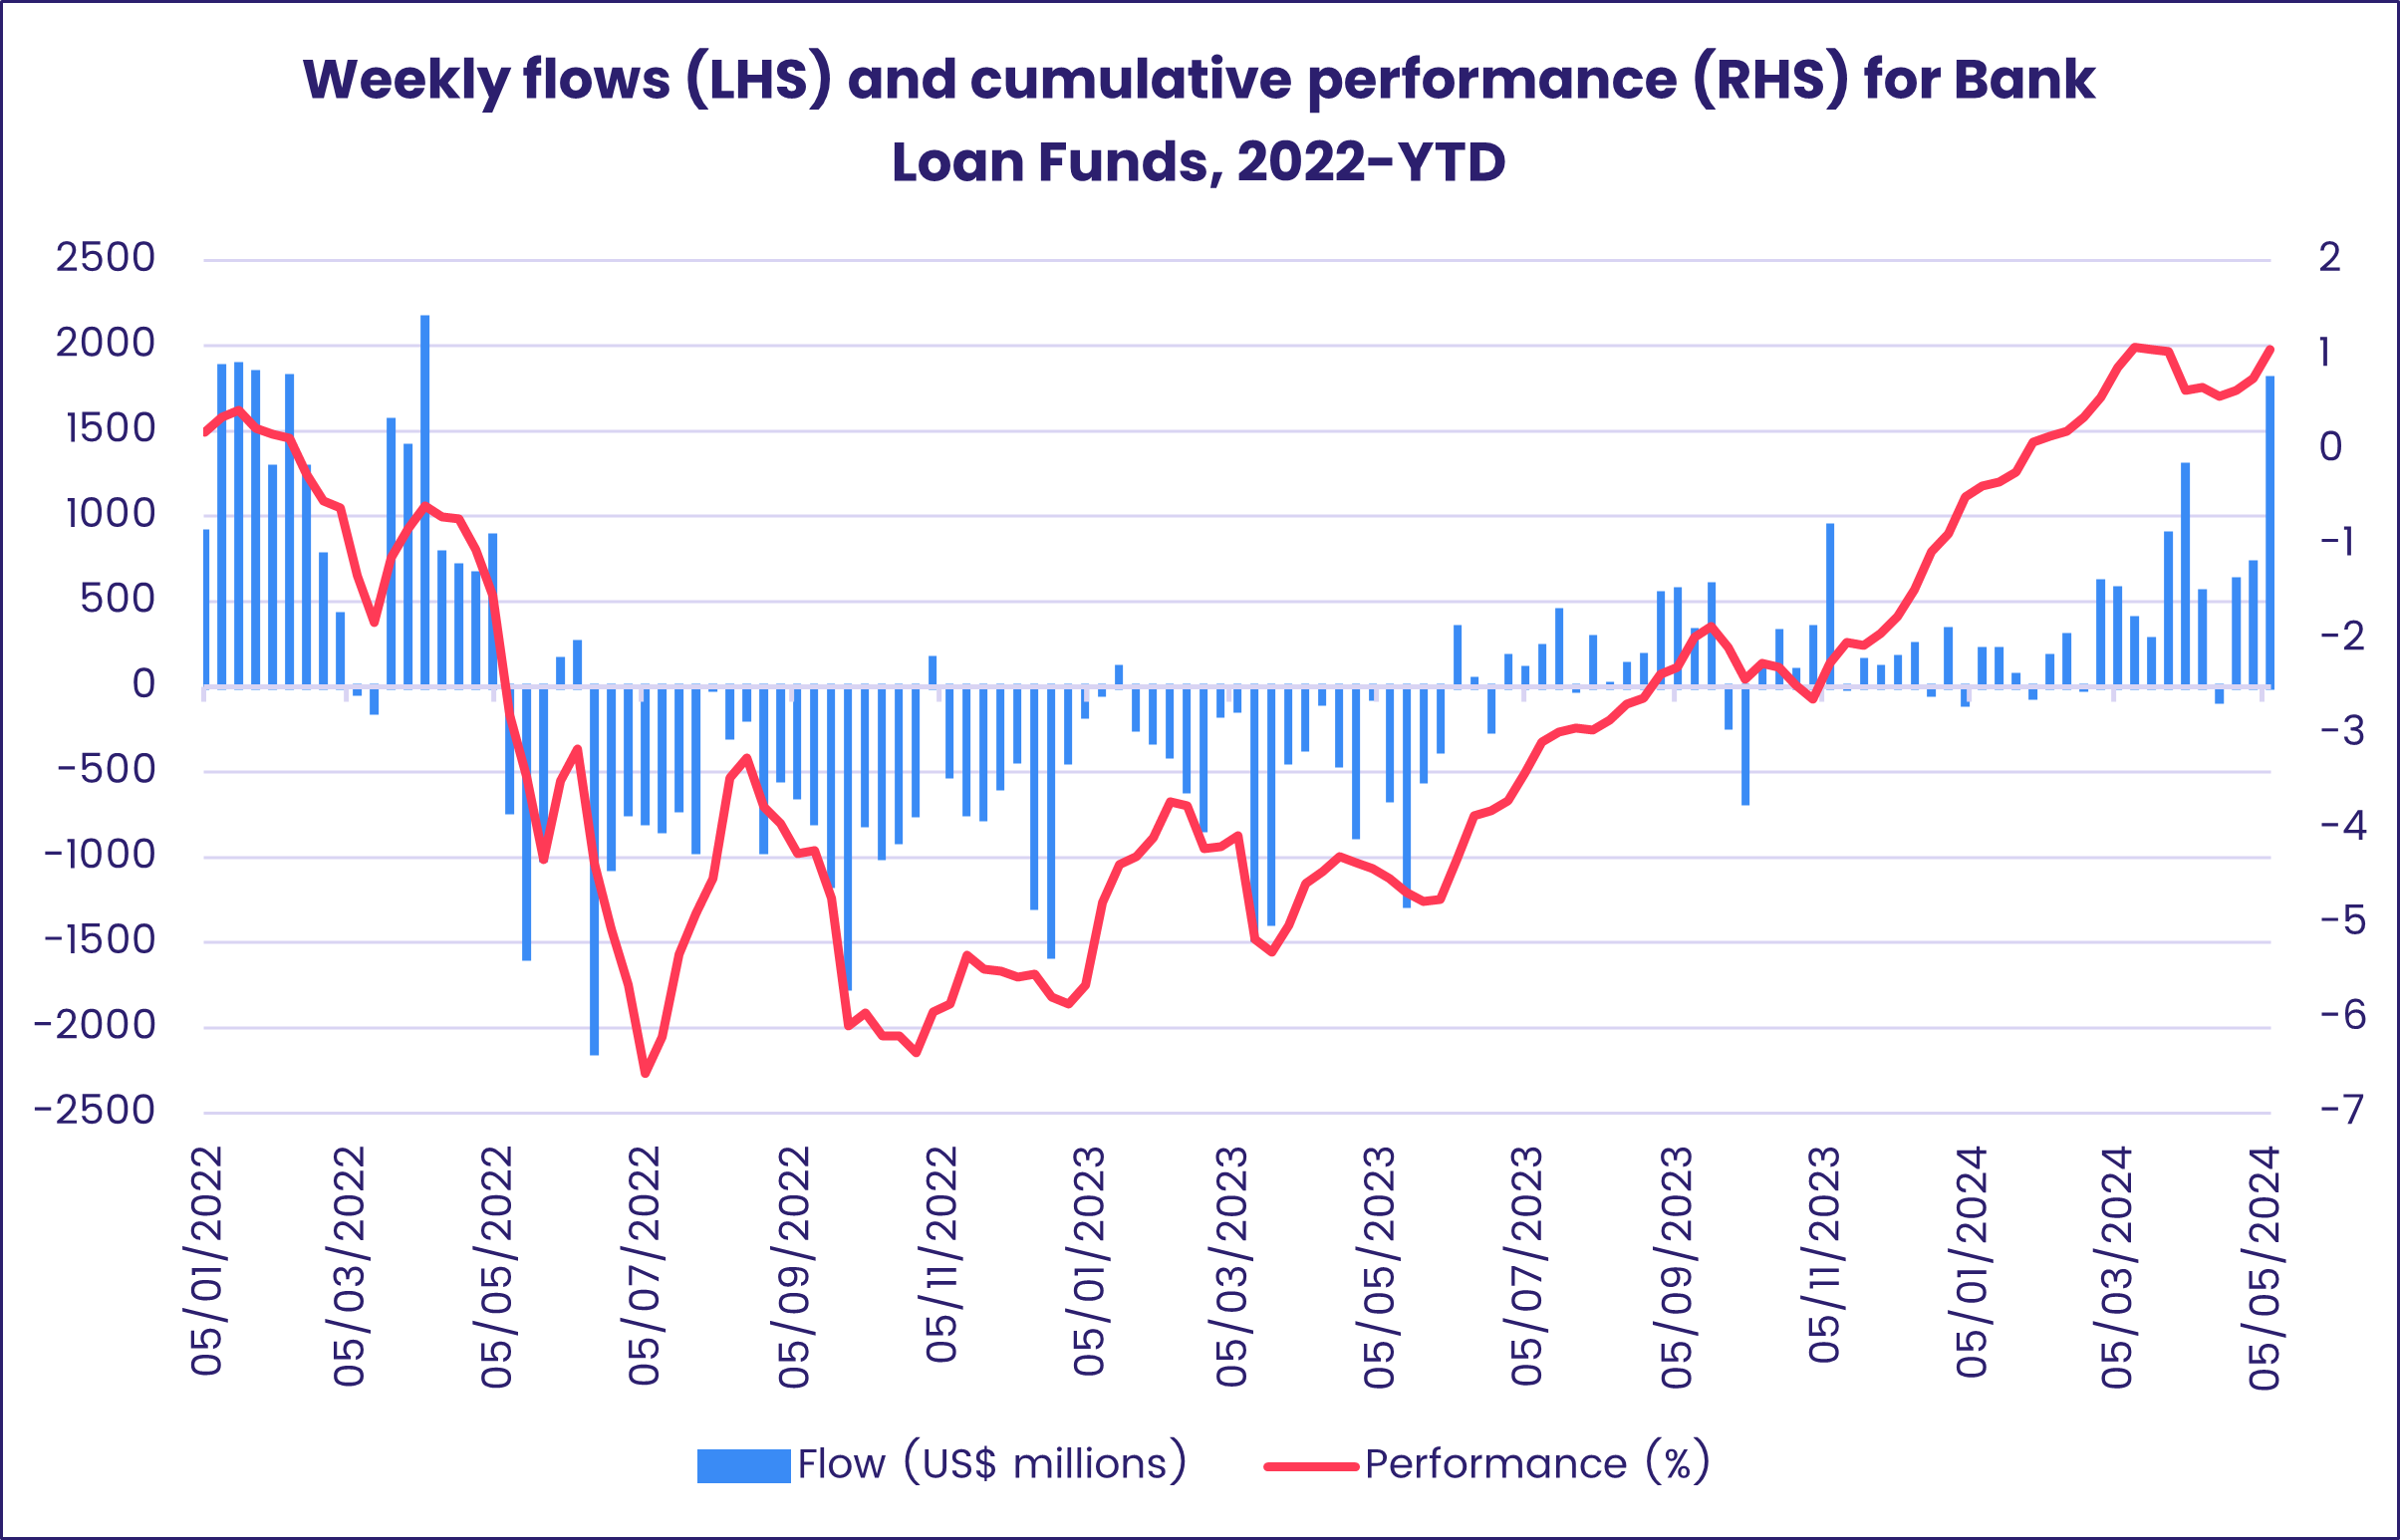 Chart representing 'Weekly flows (LHS) and cumulative performance (RHS) for Bank Loan Funds, 2022-YTD'